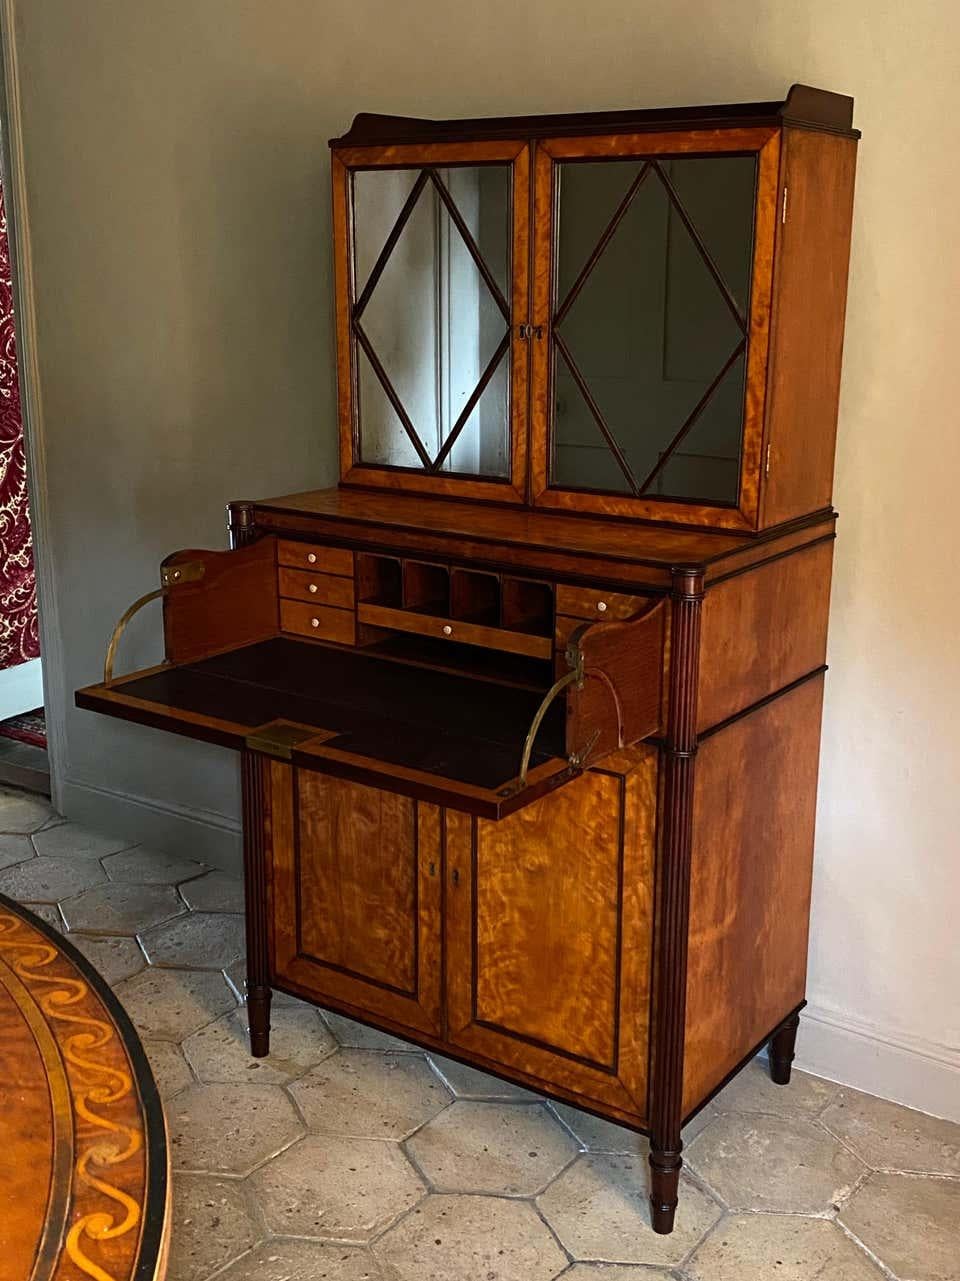 An exceptional English Sheraton period satinwood secretaire cabinet. Attributed to Gillows.

Late-18th century, George III, ca 1790.

Measures:
H 59 1/2’’ (151 cm)
W 30’’ (76 cm)
D 19’’ (49 cm).

This small, beautifully-proportioned, and